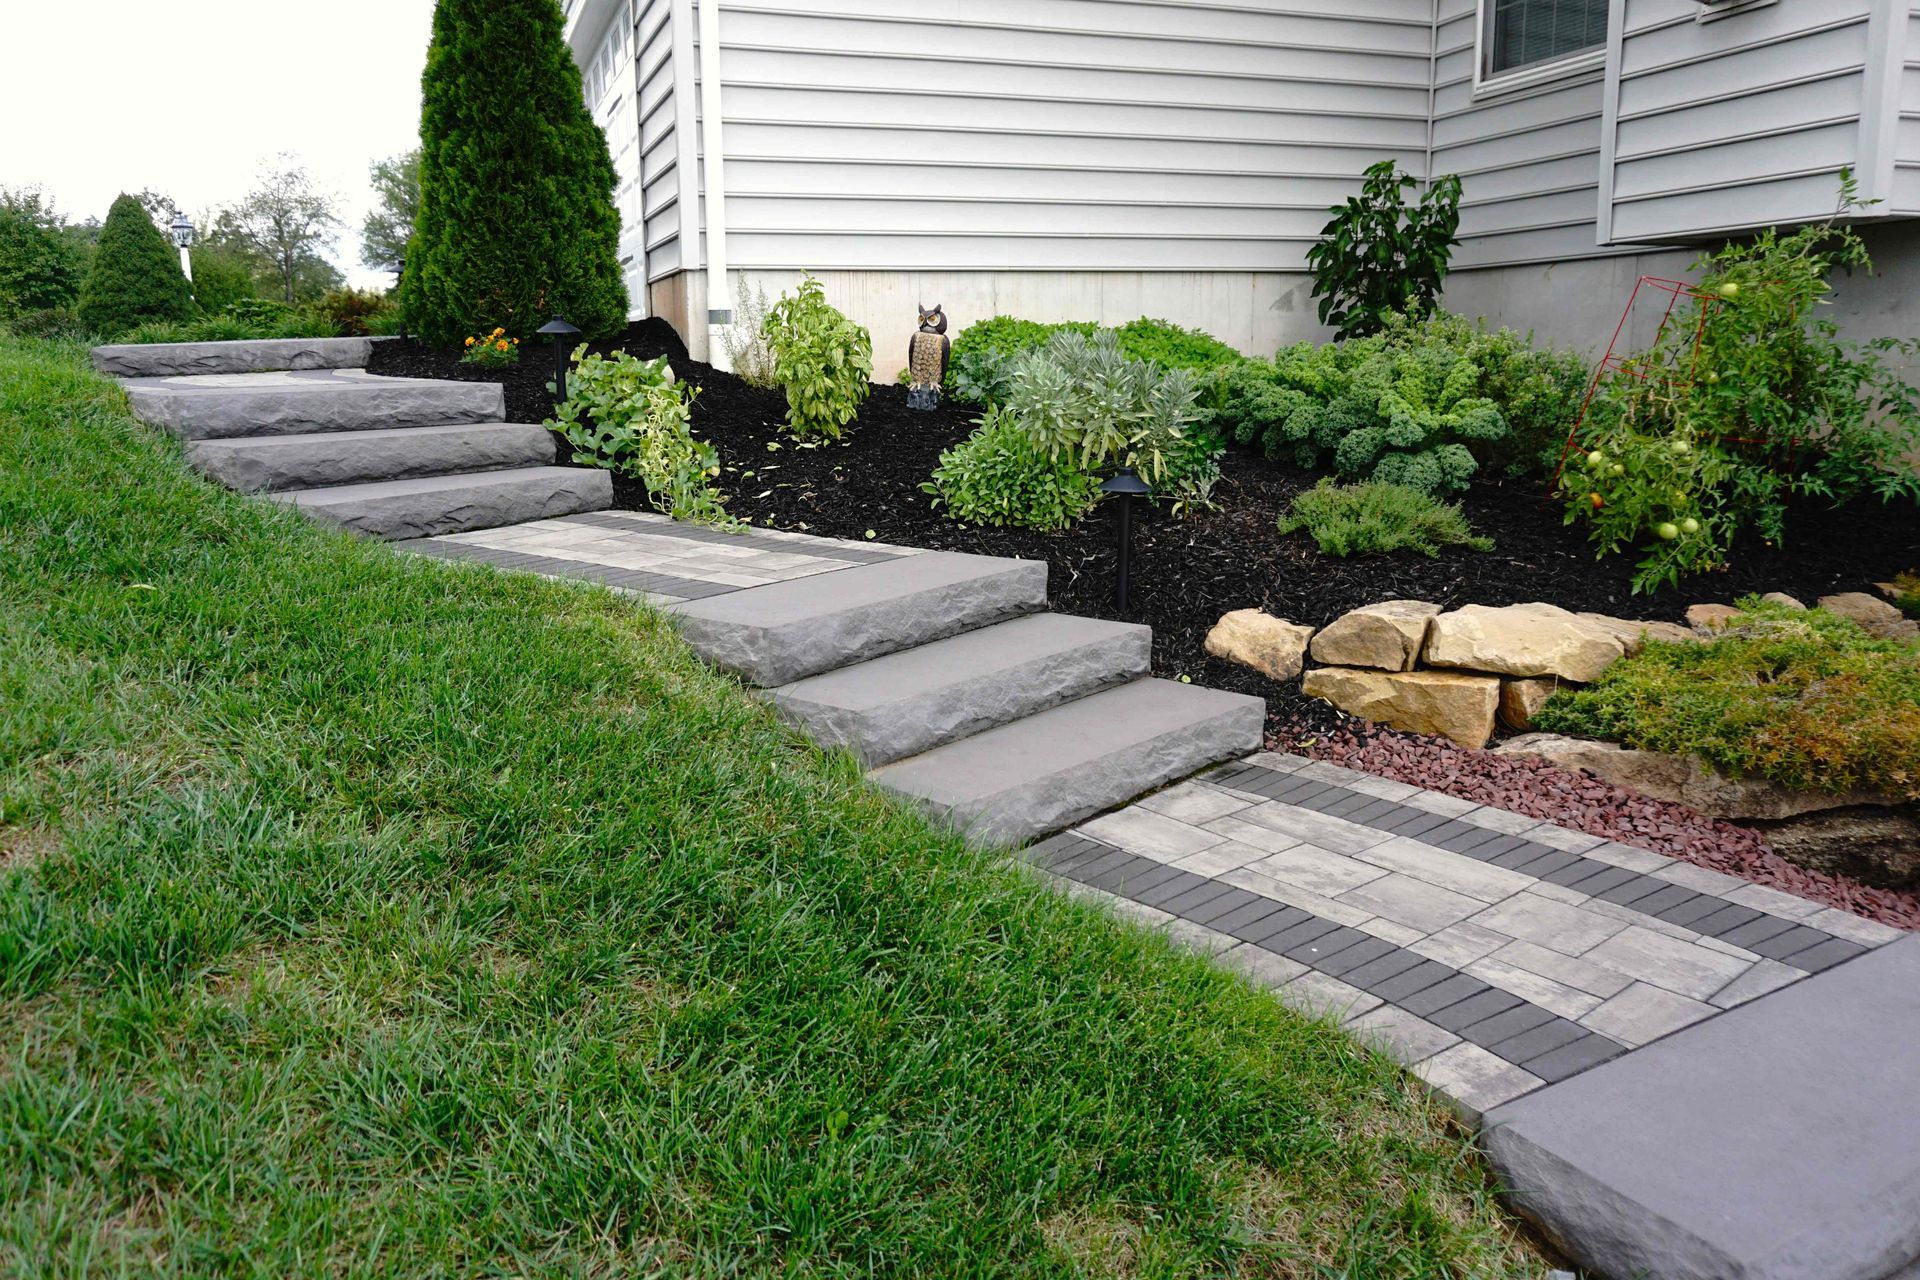 Nicolock Rockface Steps for Sale Near Me. Pavers & Wall Blocks delivered to Lebanon, Annville, Palmyra, & Cornwall.